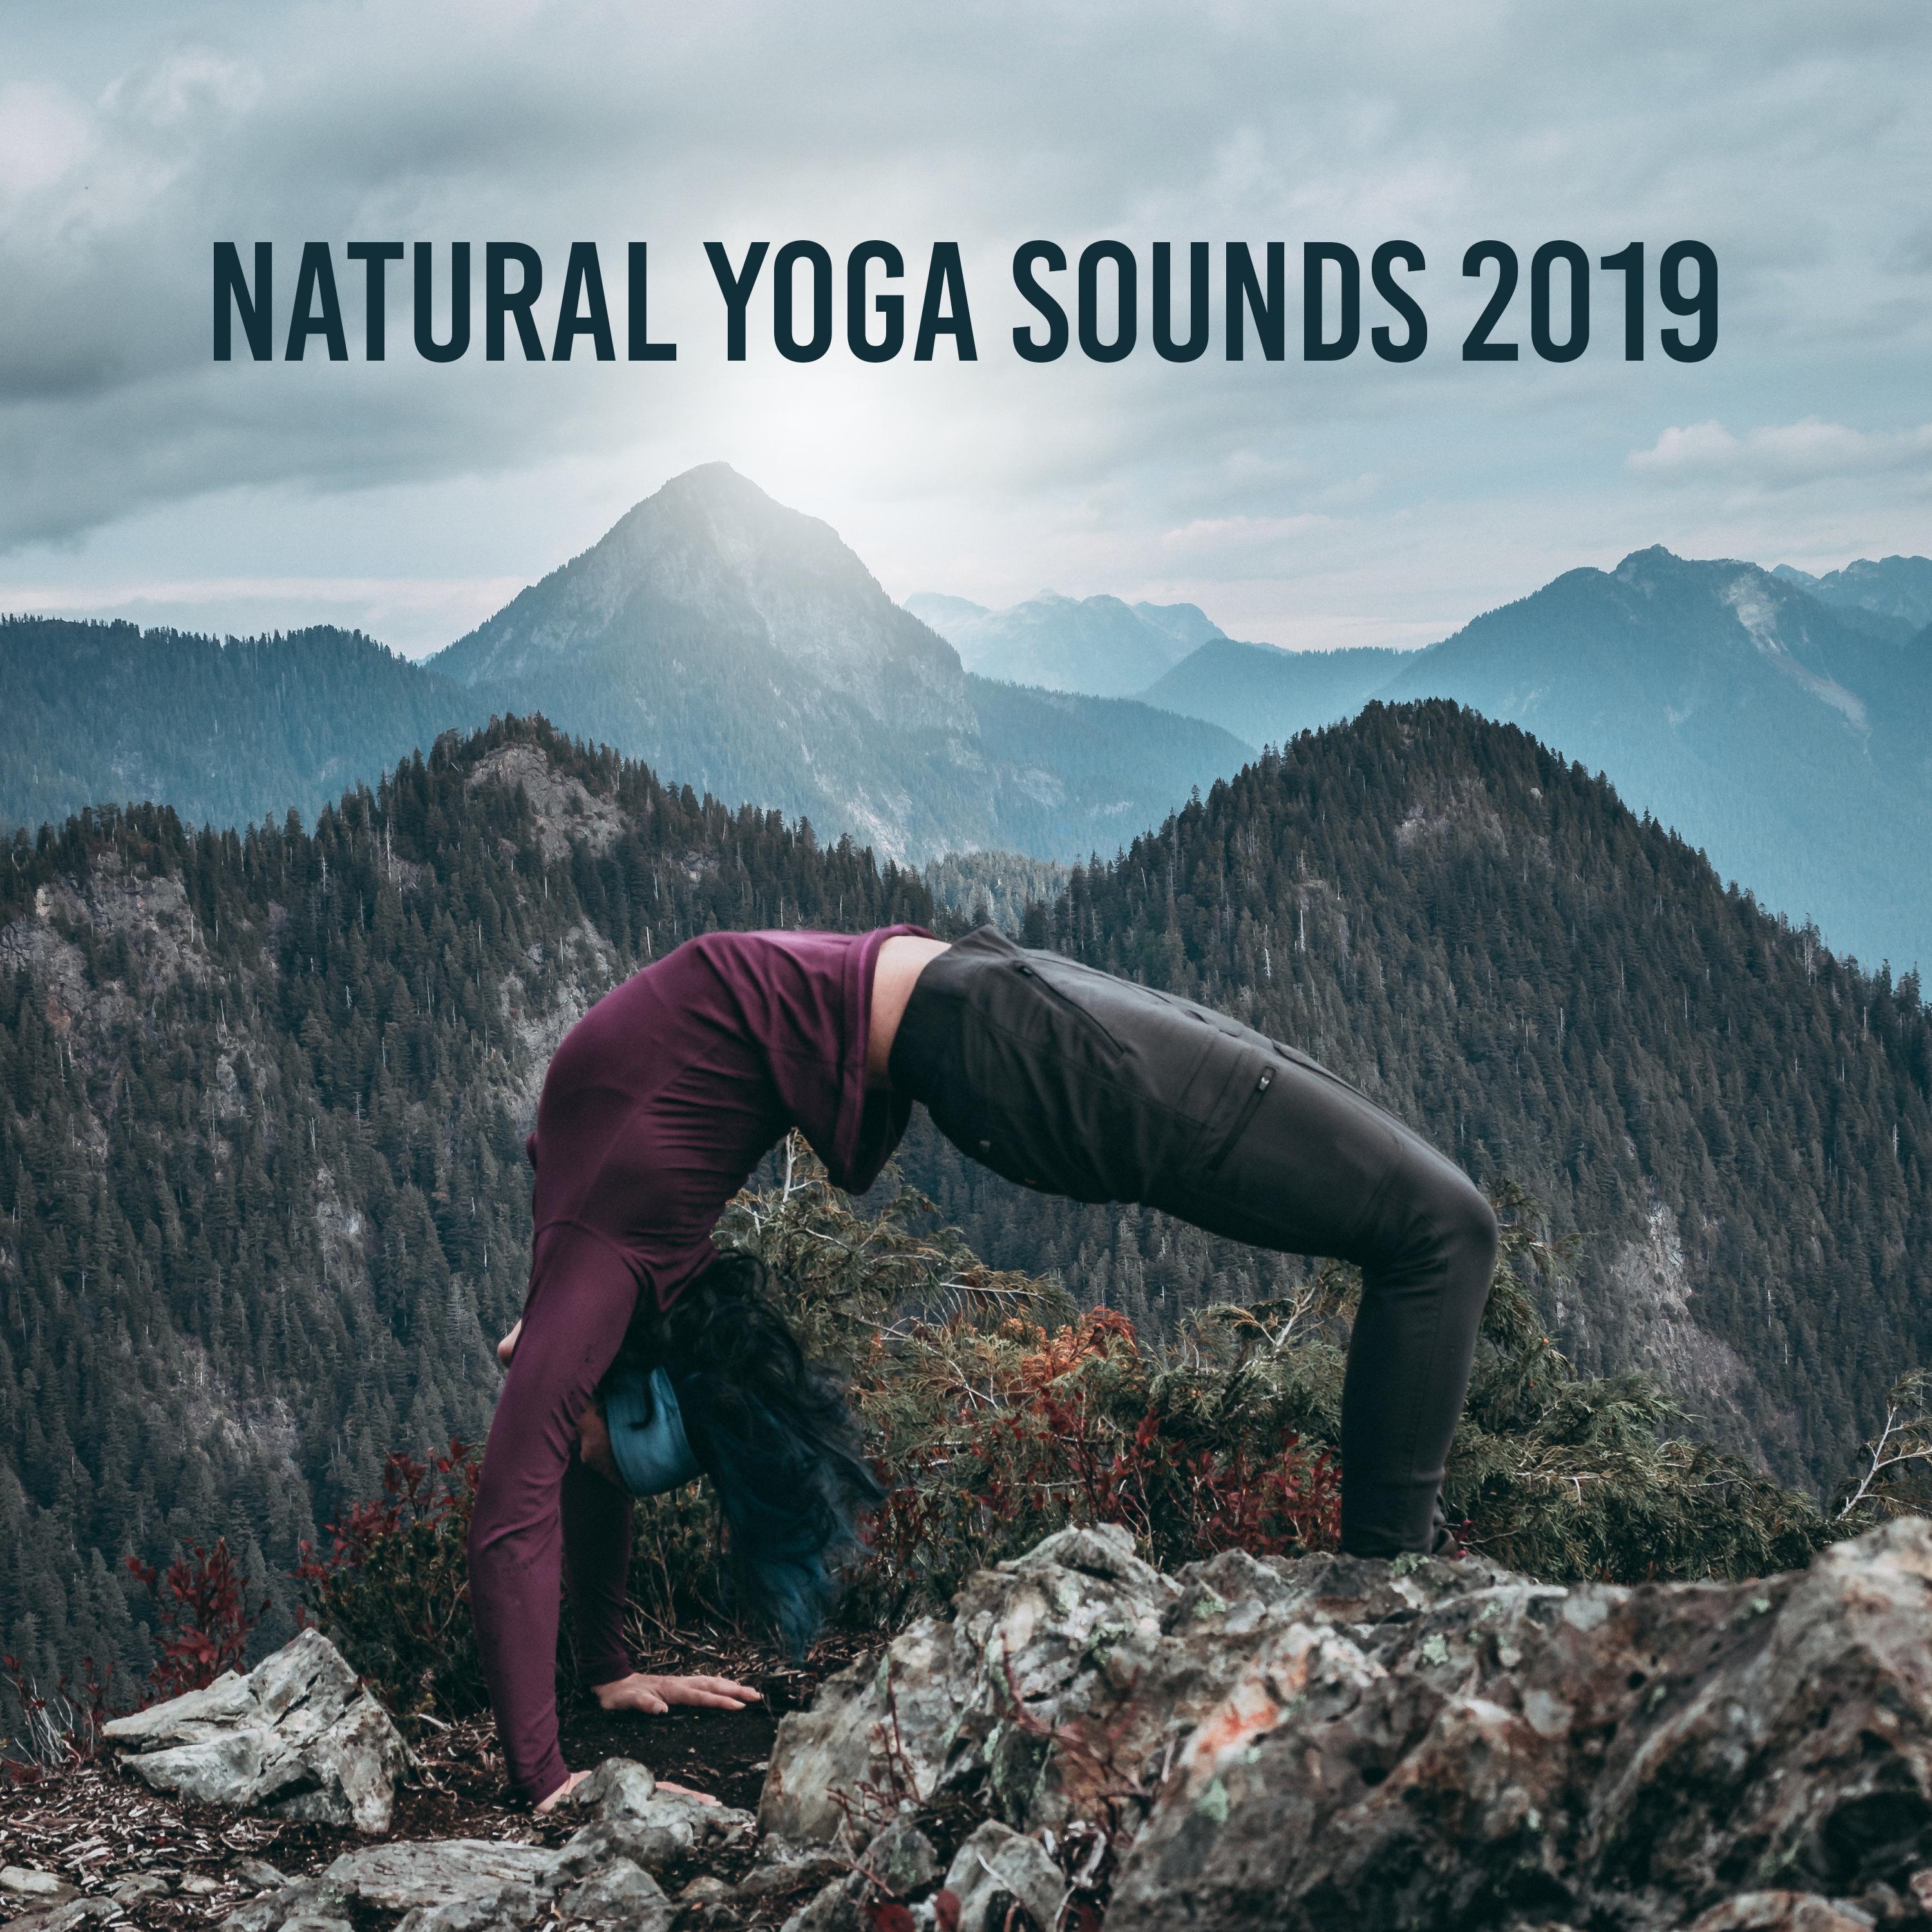 Natural Yoga Sounds 2019  15 New Age Songs for Meditation  Deep Relaxation, Nature Music, Zen Melodies, Mantra, Mindfullness Lullabies